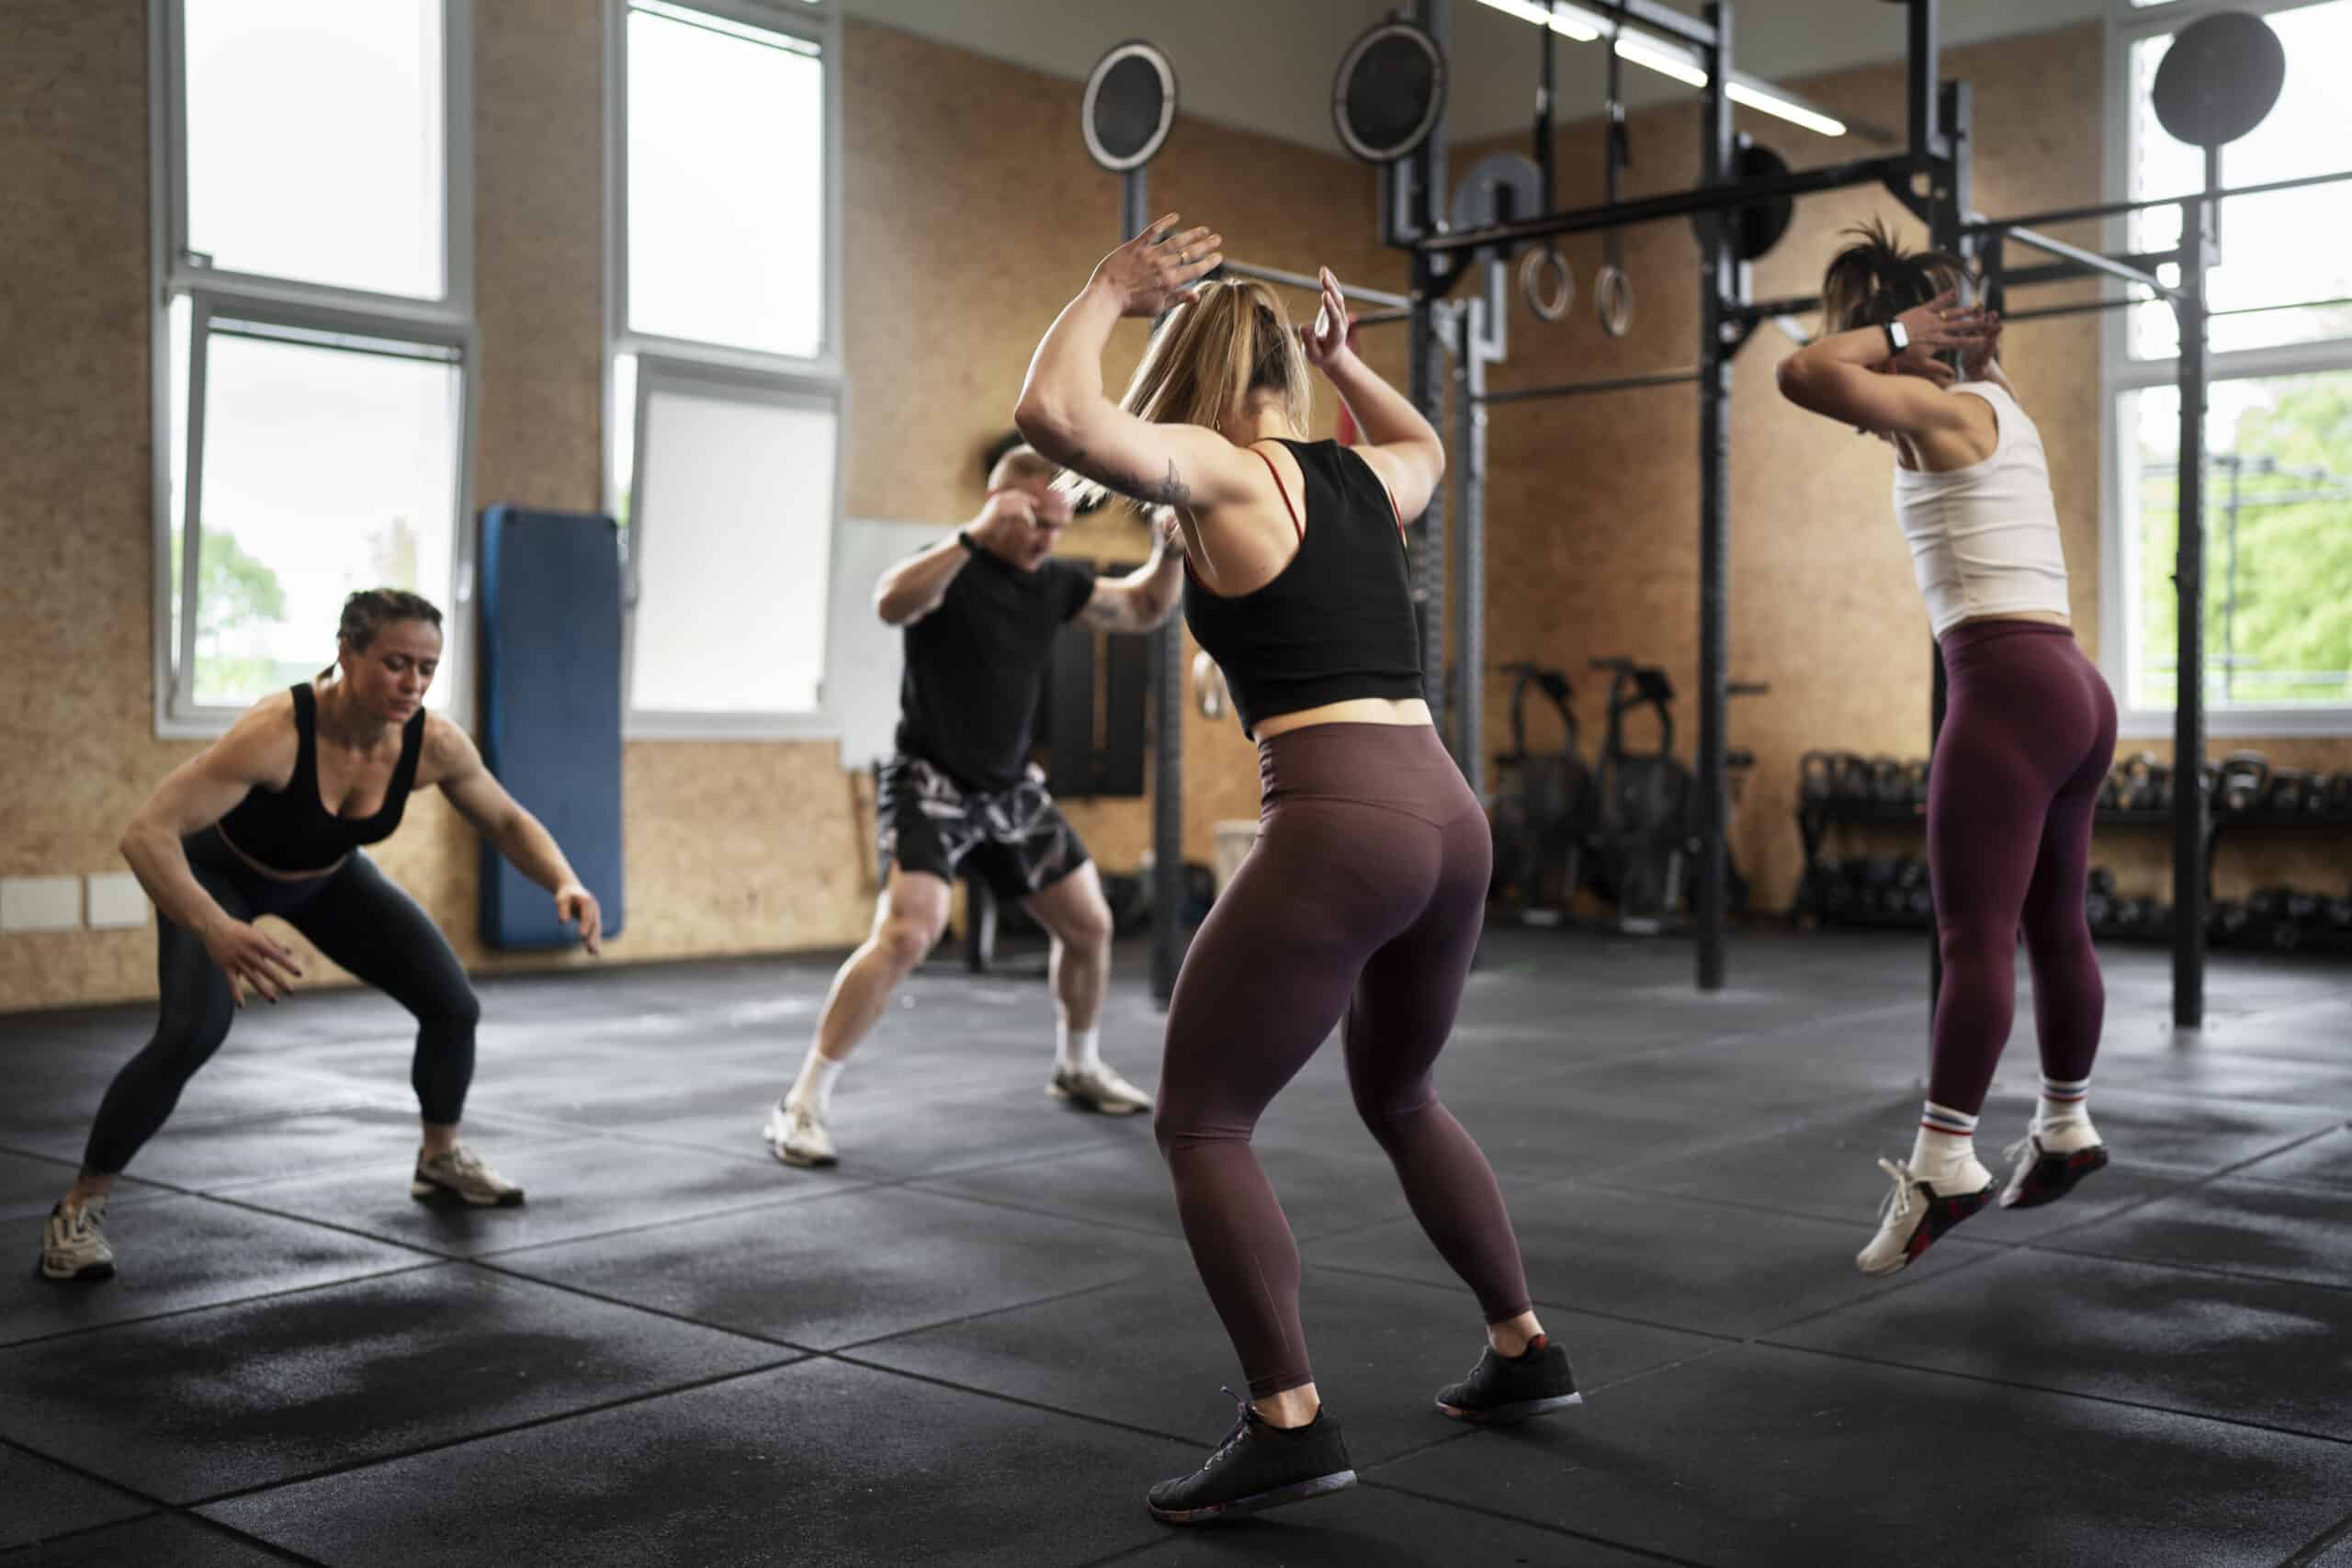 5 Important Considerations for Choosing a Gym